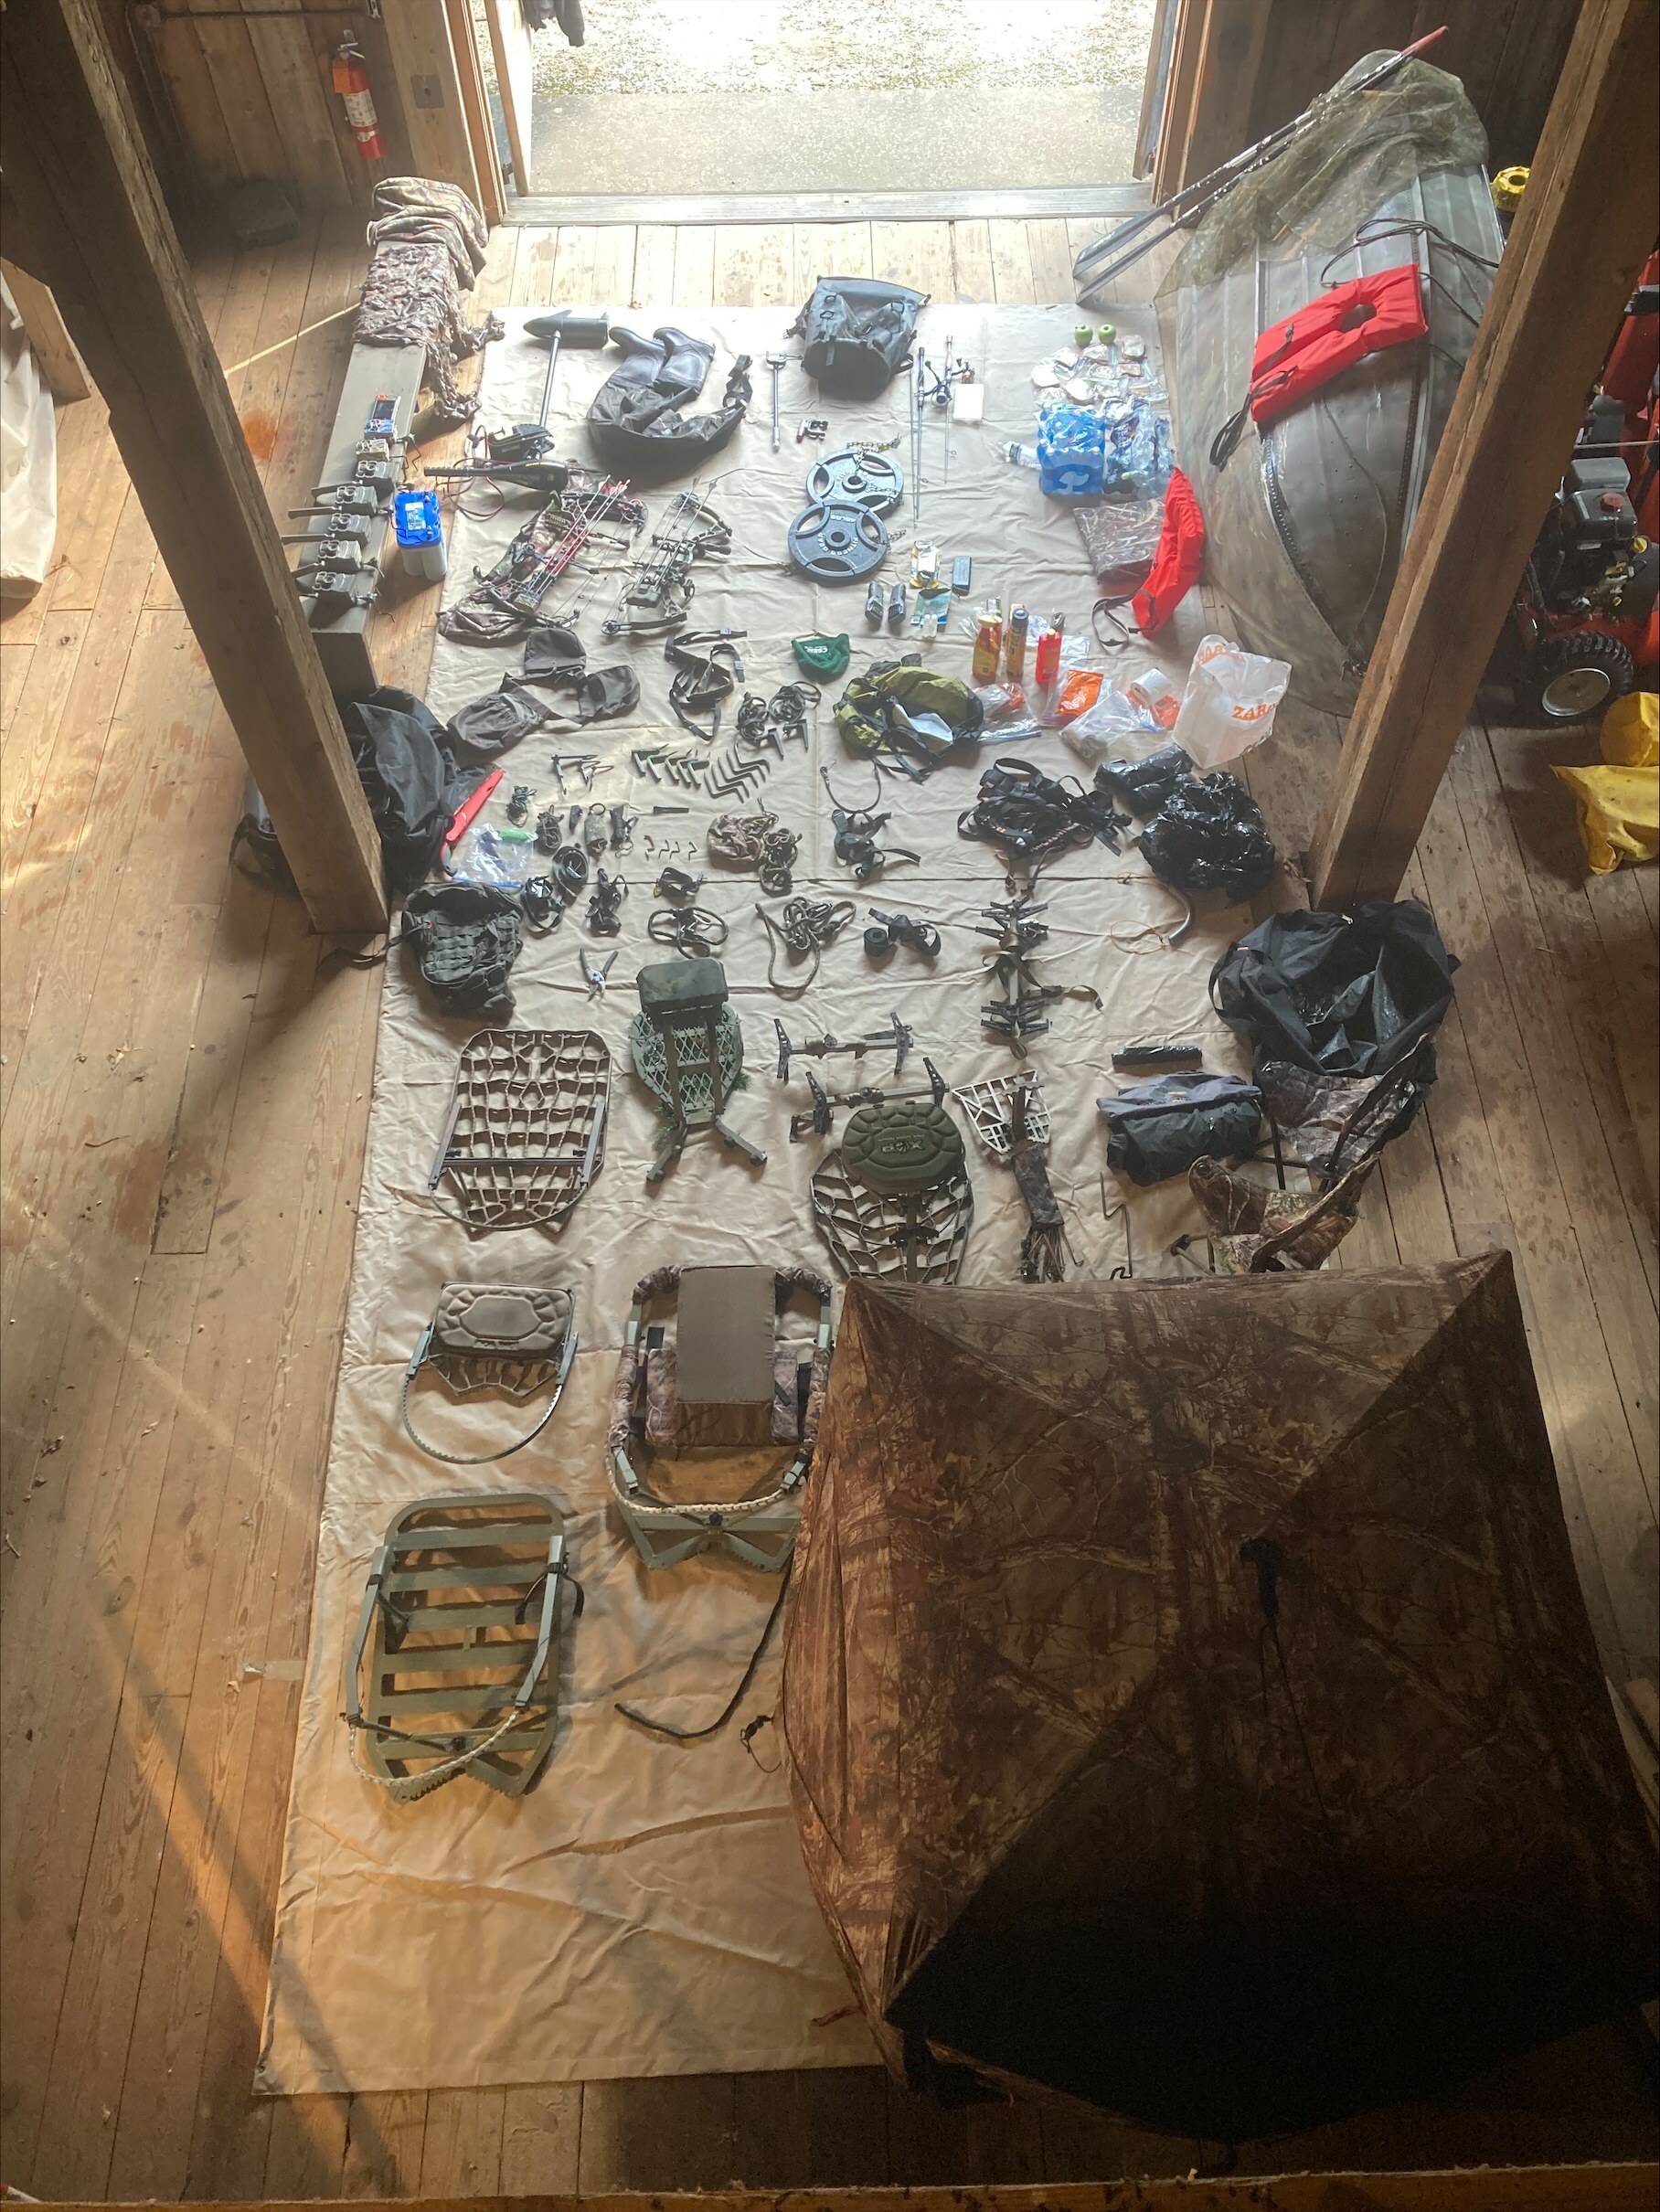 Some of the equipment and gear seized.